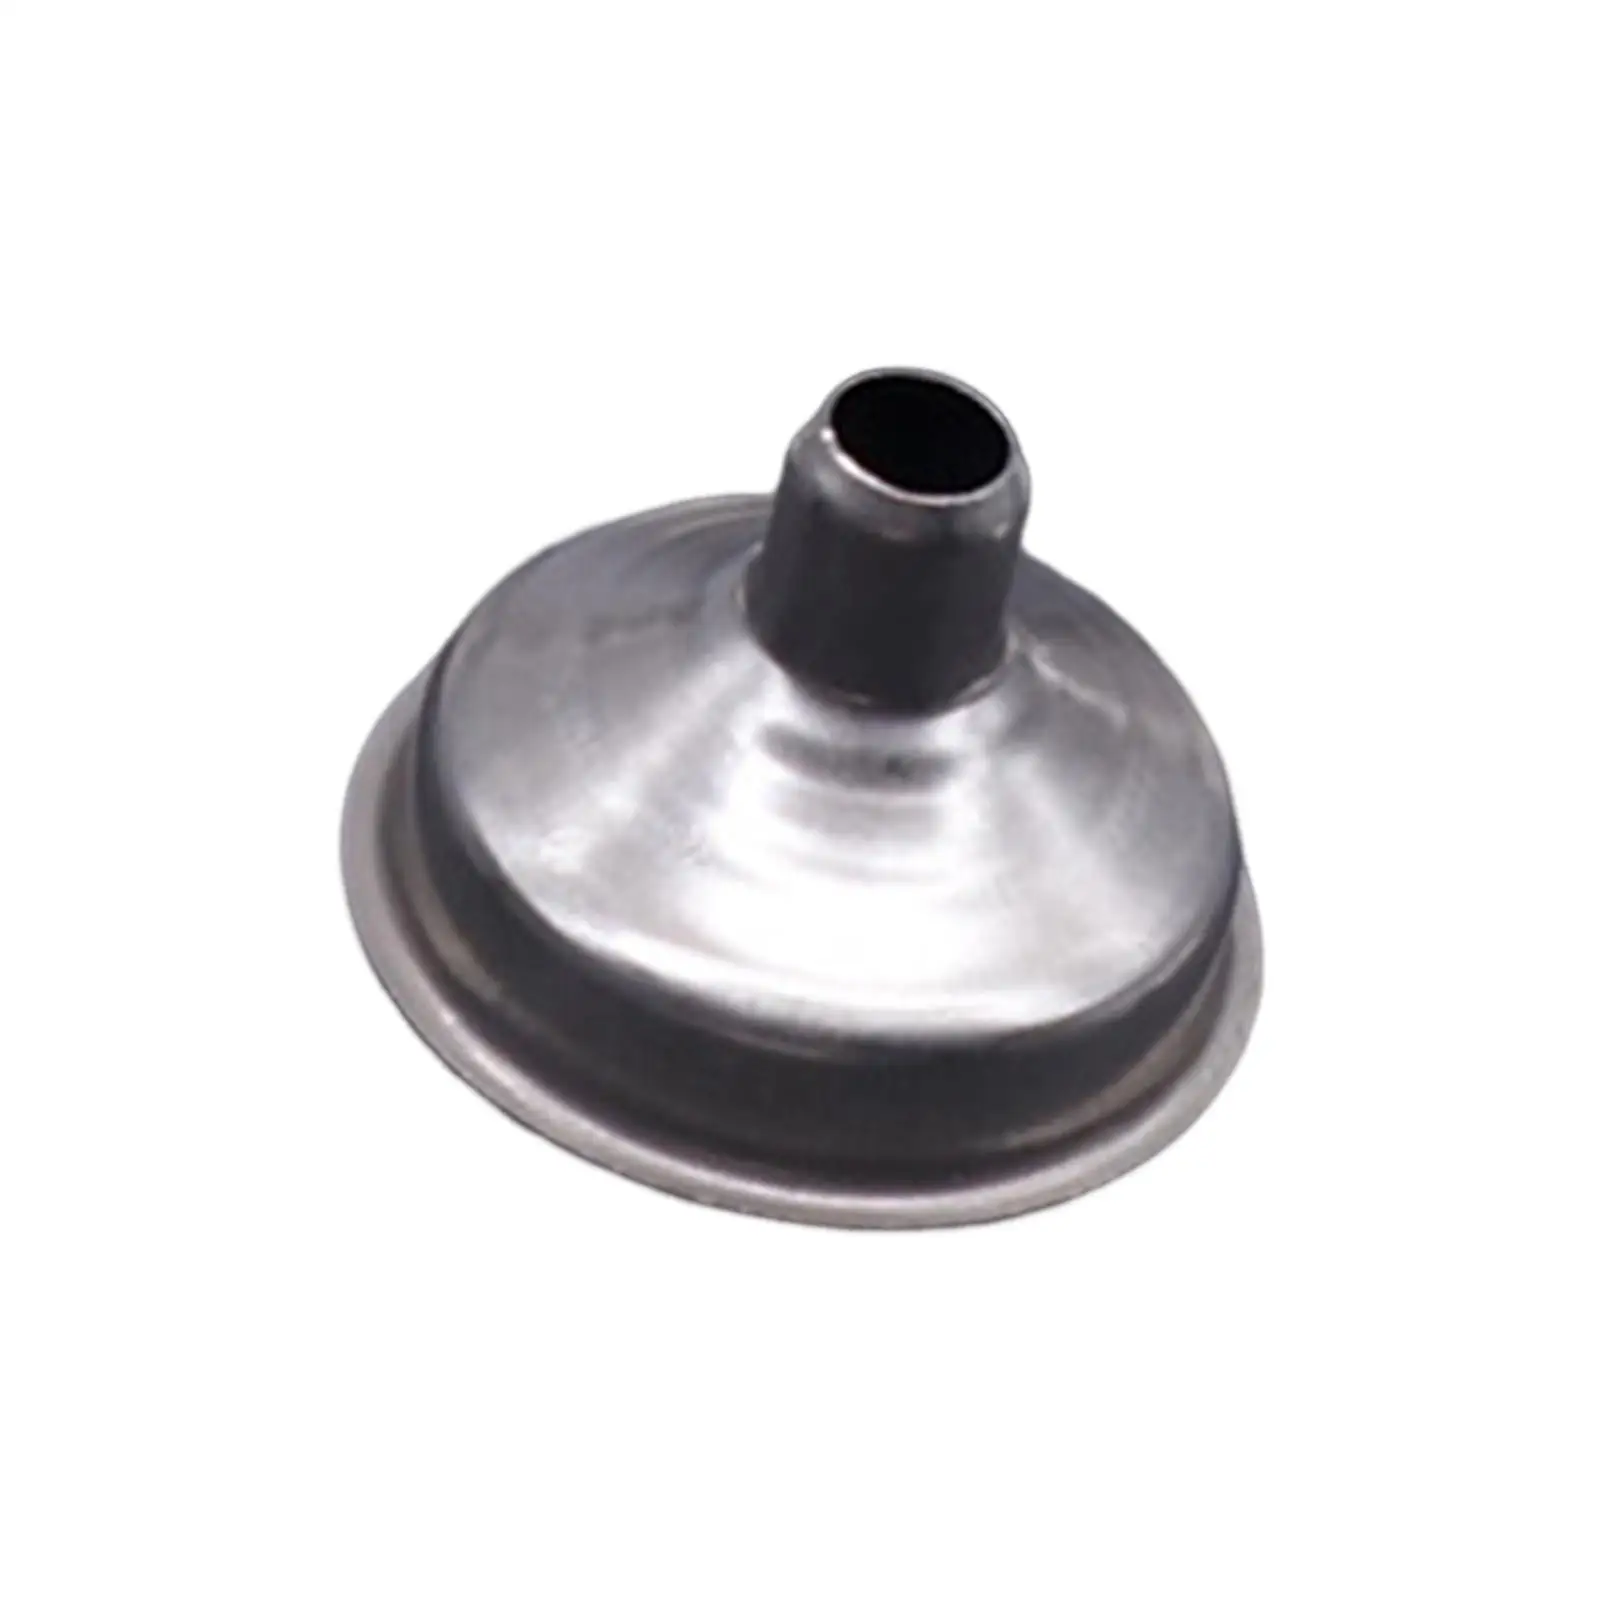 Stainless Steel Kitchen Funnels Mini Funnel Strainer Filter for Transferring Fluid Liquid Oil Powder and Dry Ingredients